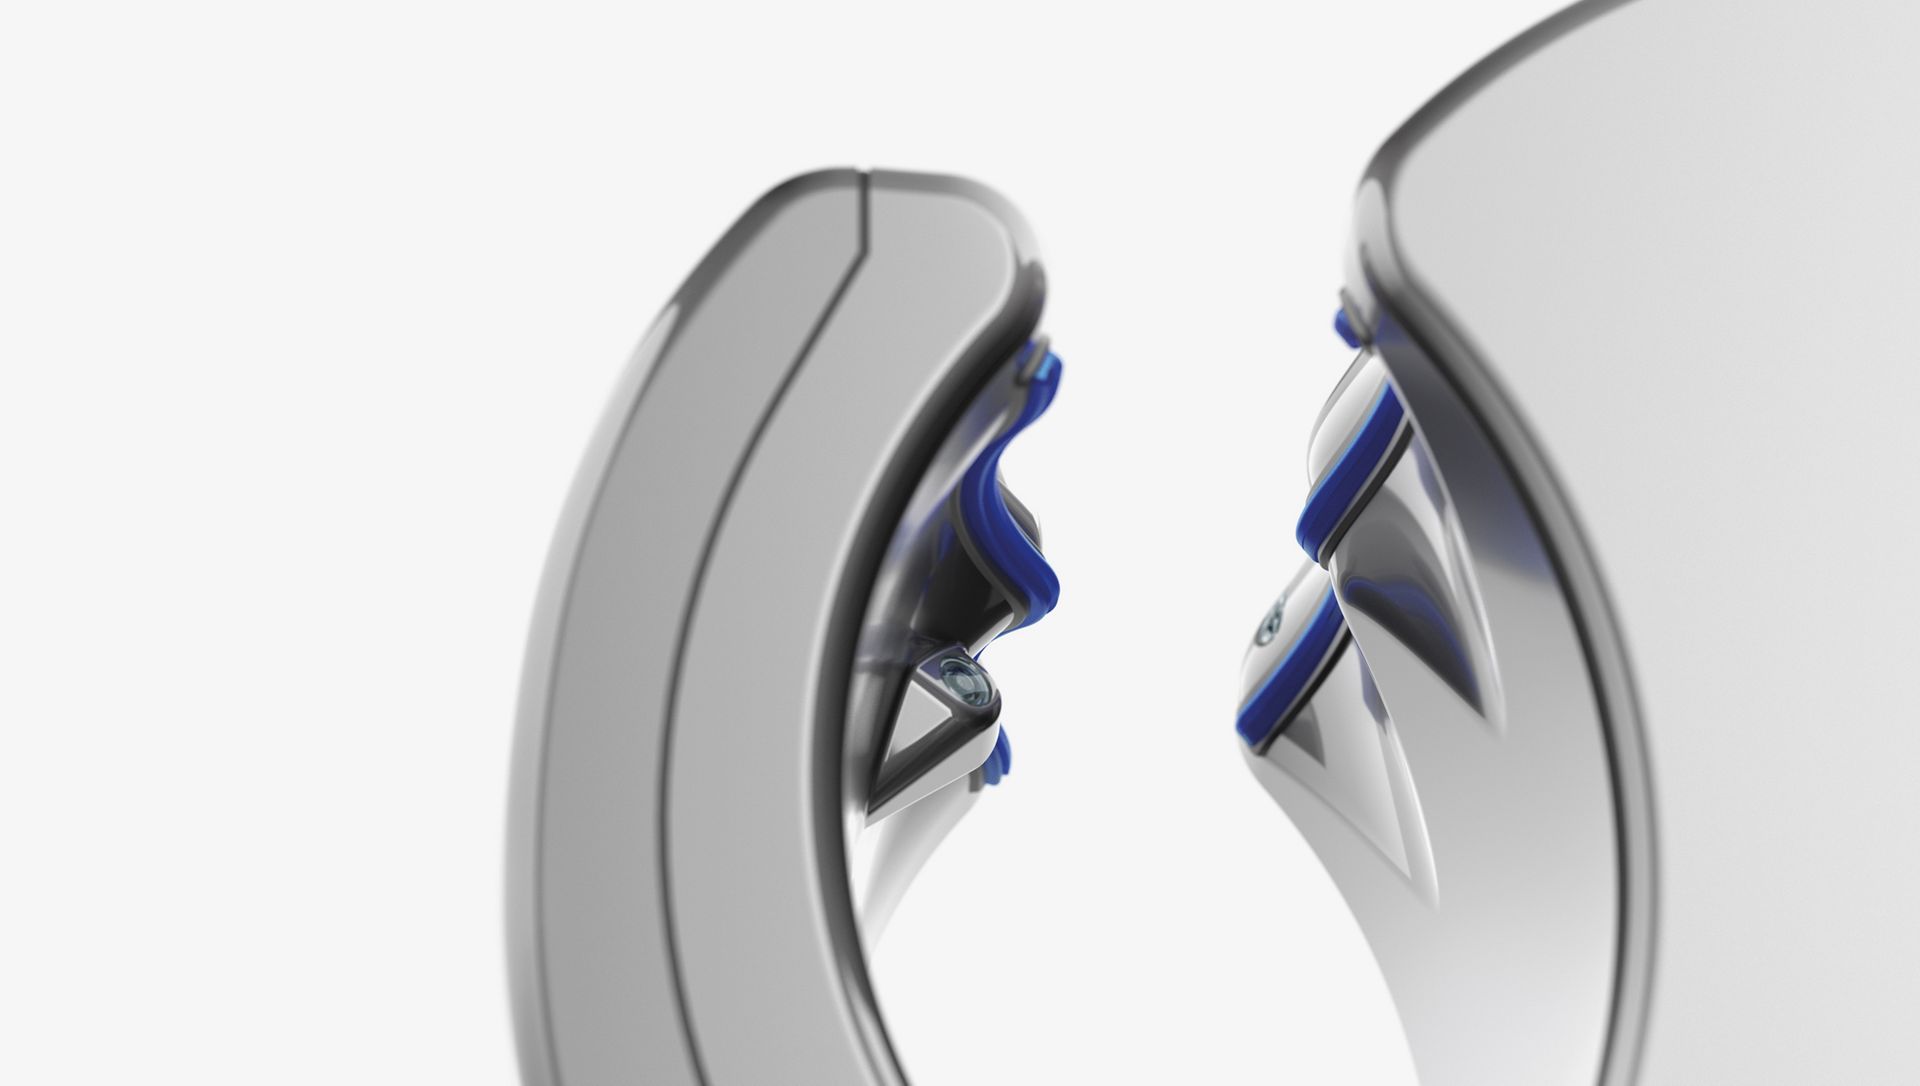 Sideview image of Dyson Airblade dB